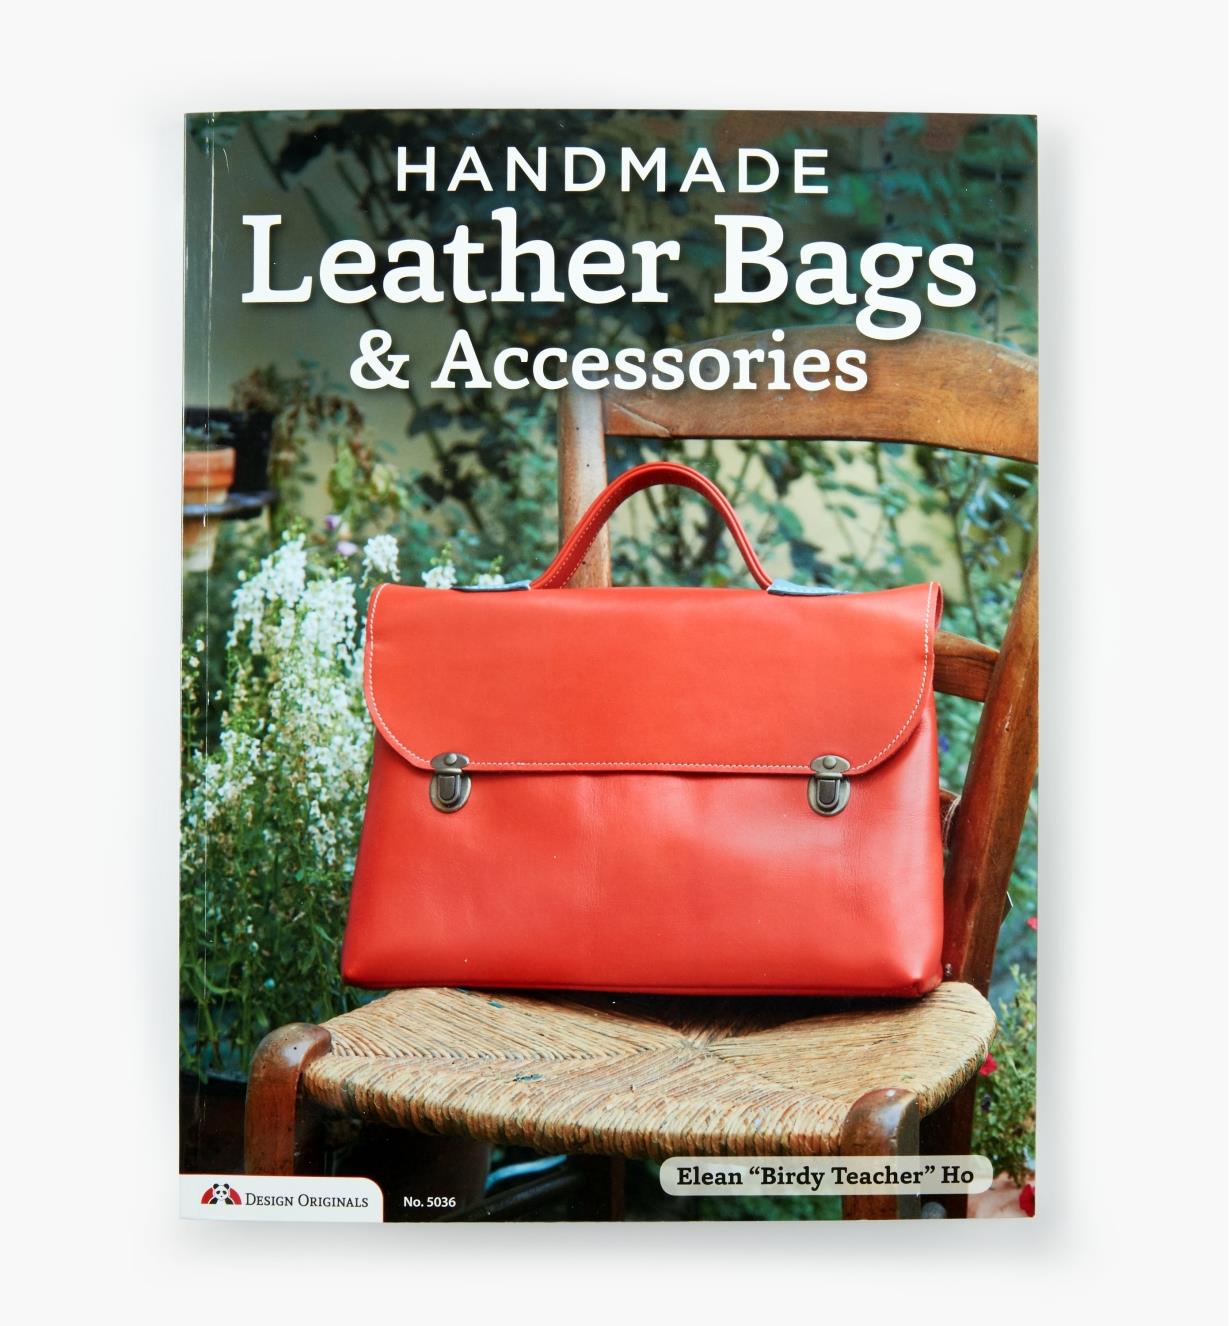 49L5125 - Handmade Leather Bags & Accessories